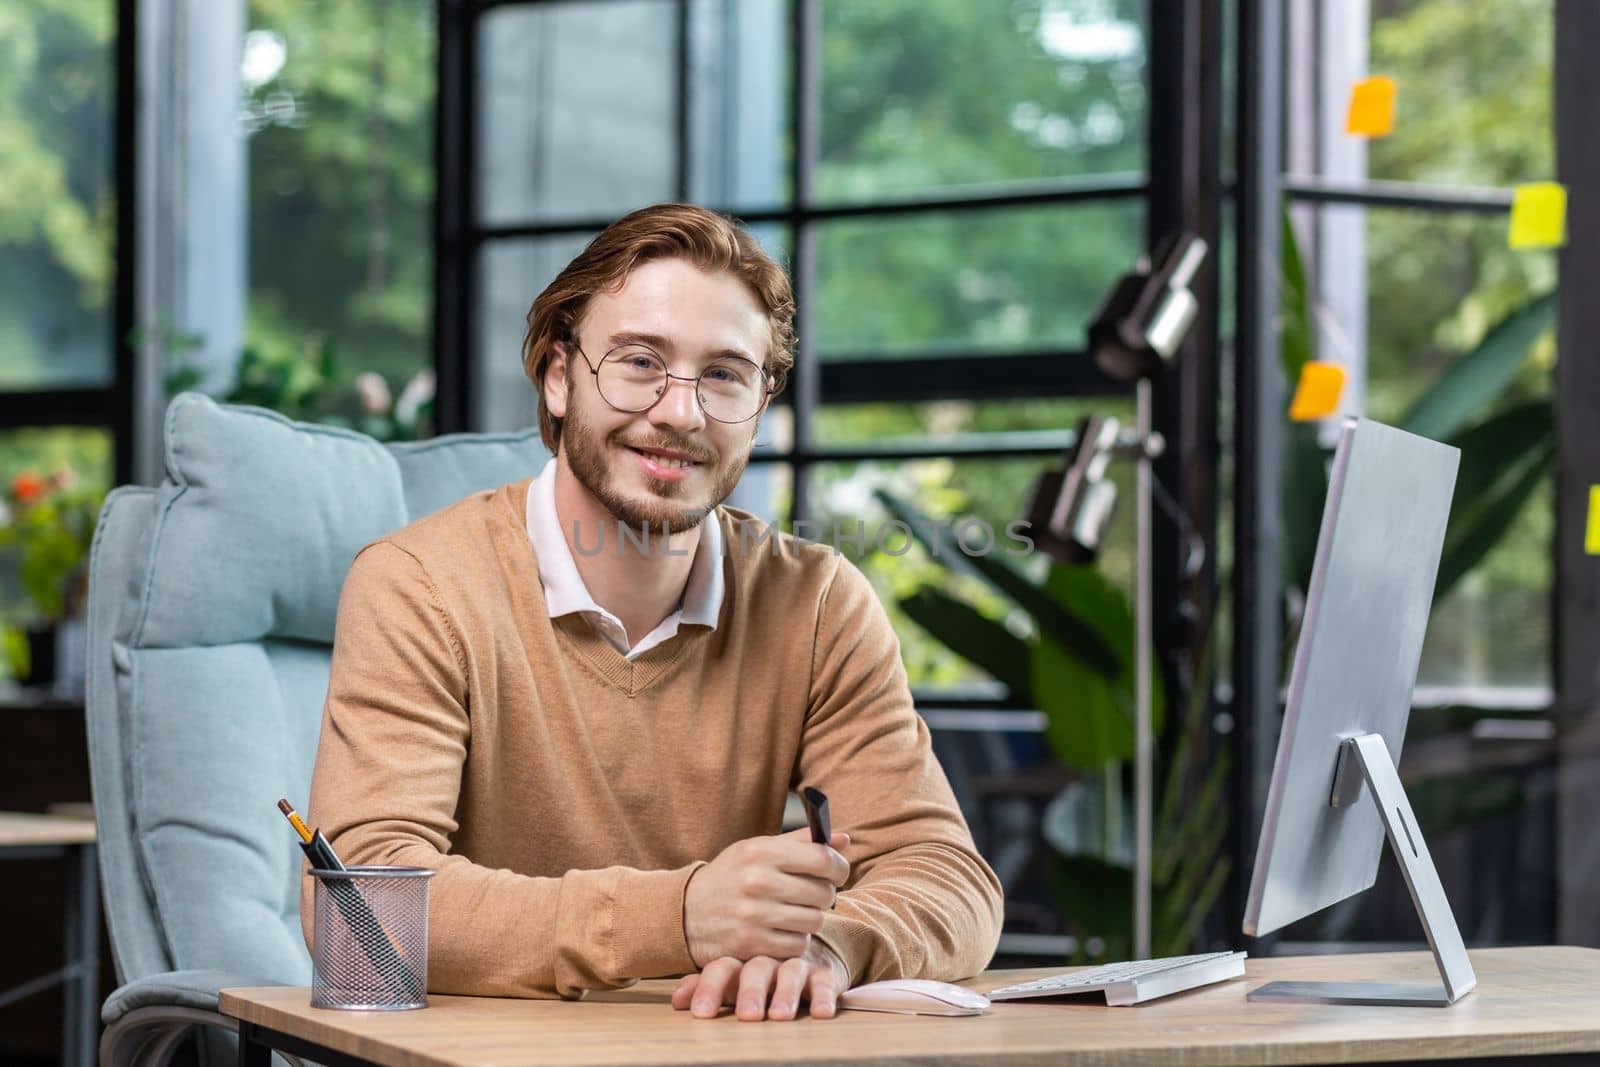 Portrait of successful smiling programmer inside modern green loft office, blond man smiling and looking at camera, businessman in sweater and casual shirt close up working with computer.